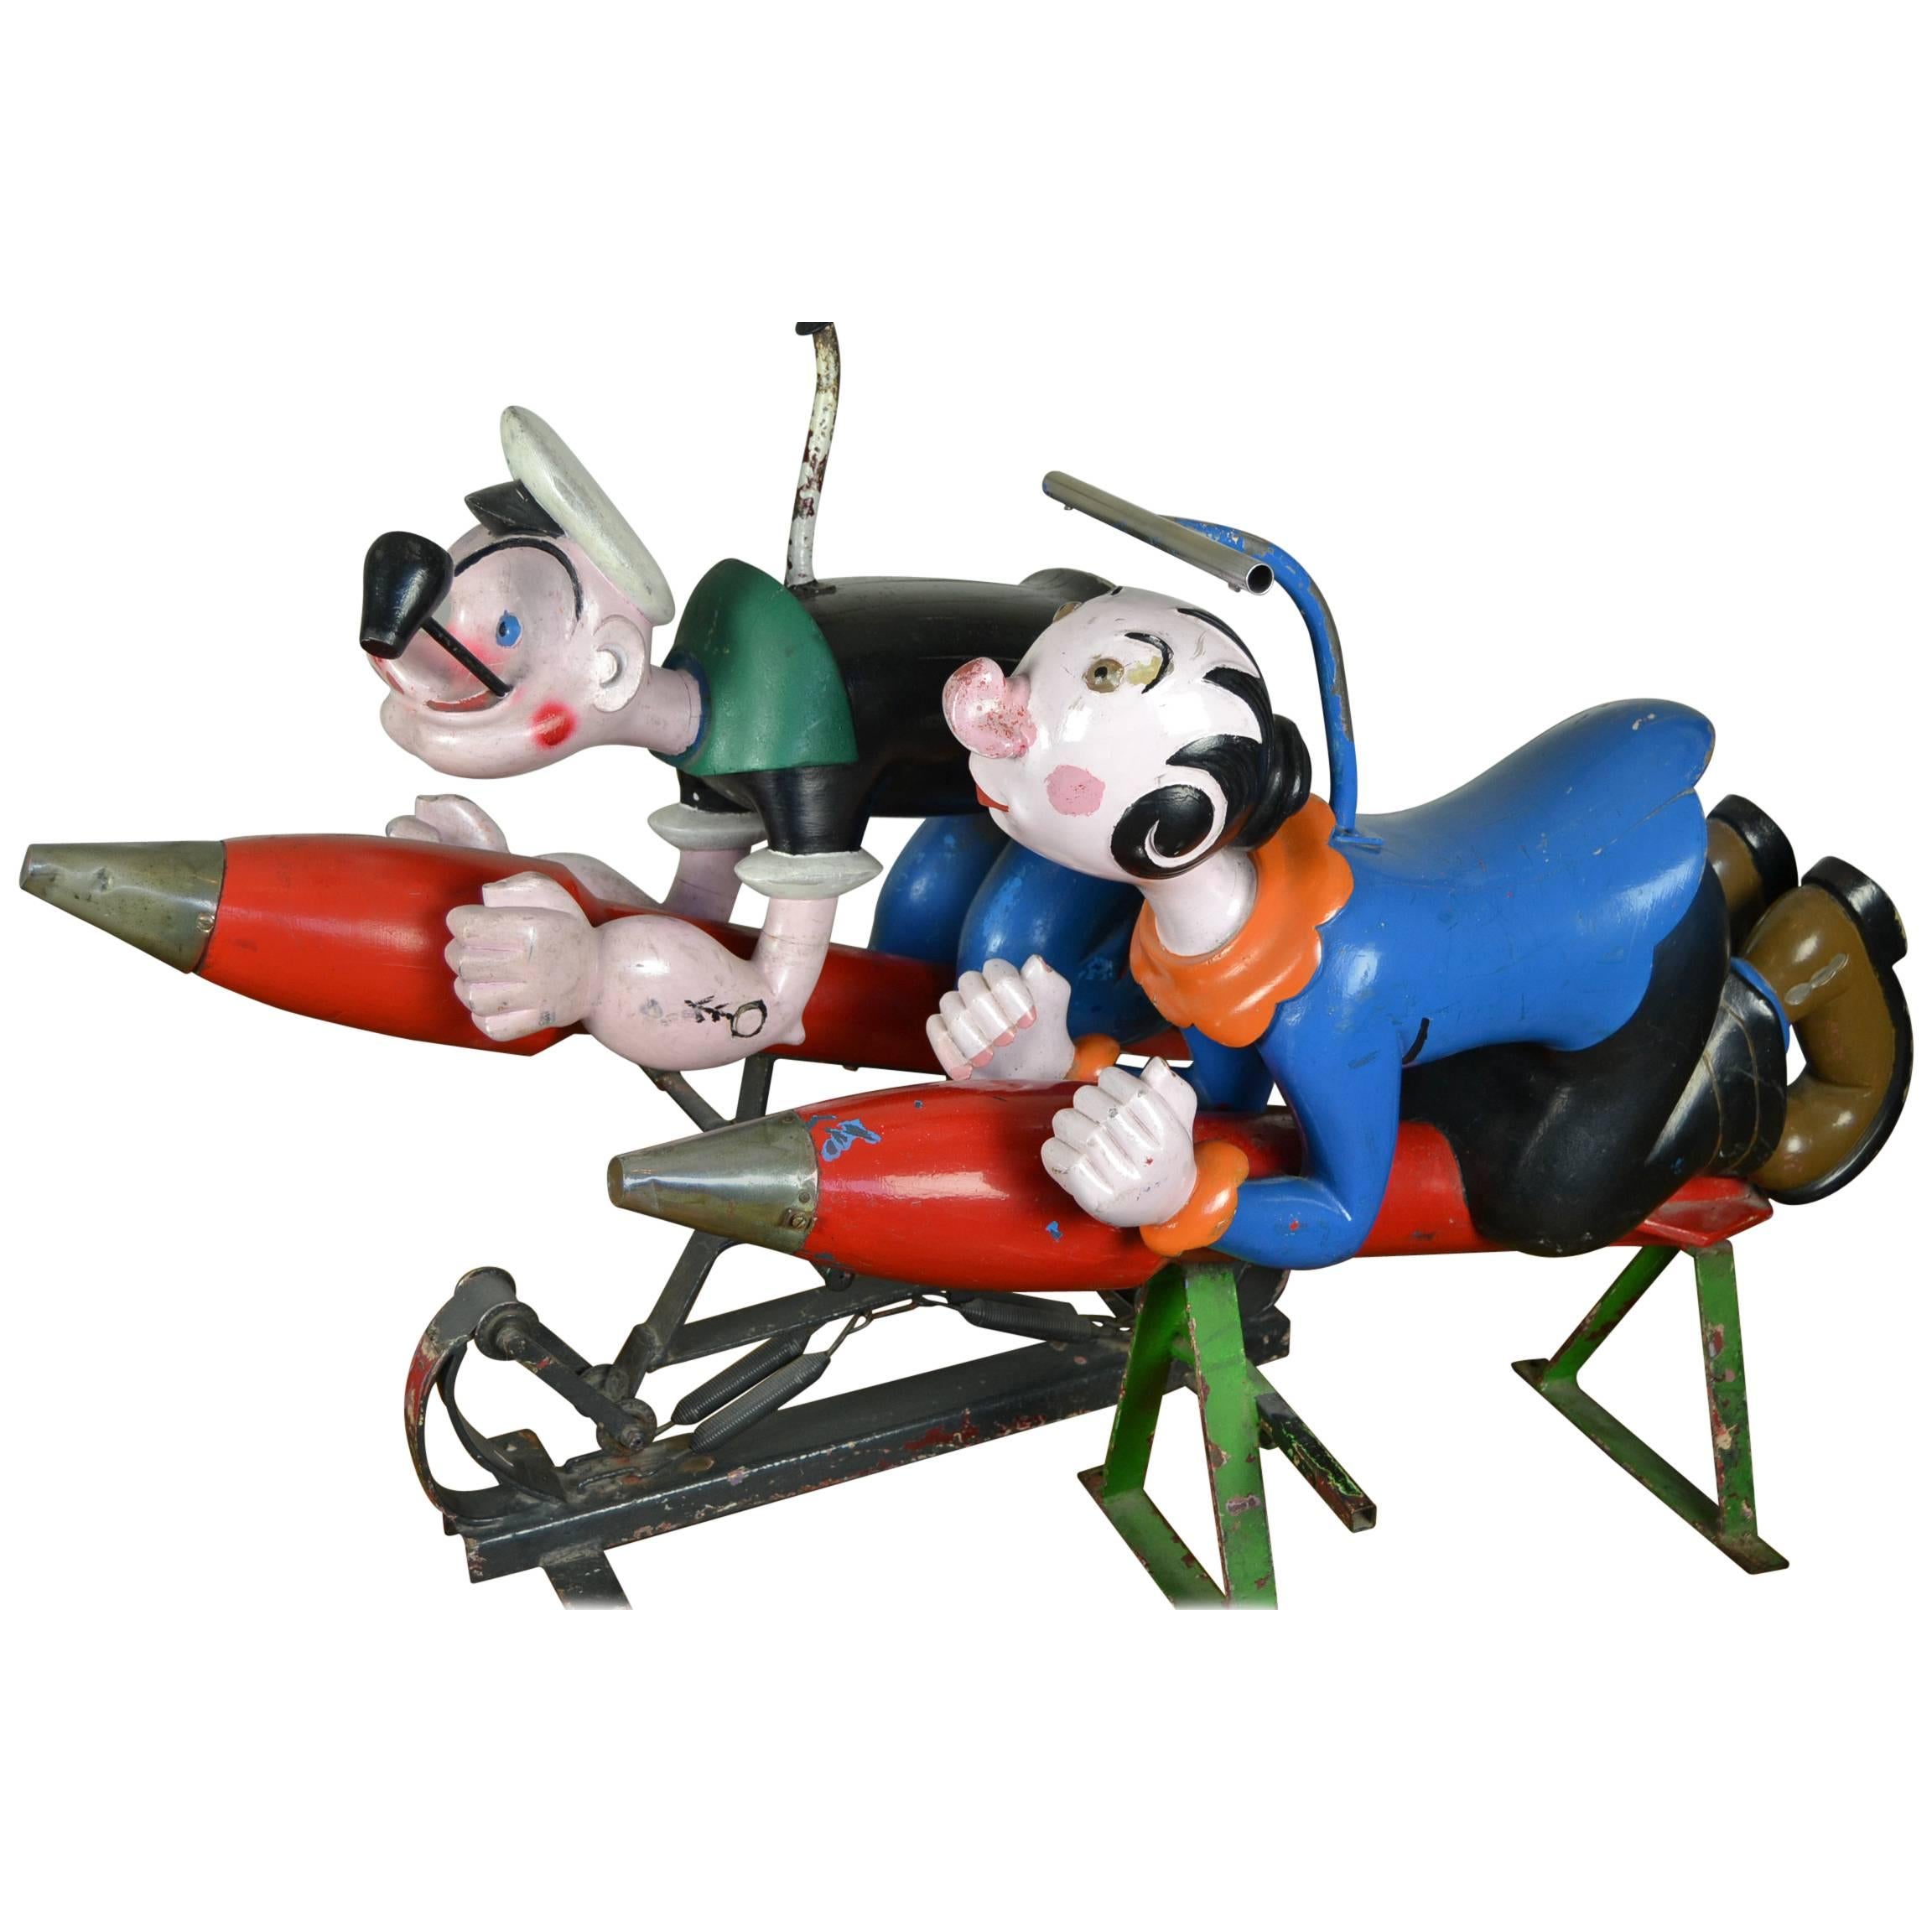 Wooden Popey and  Olive Oyl Carousel Sculptures by Bernard Kindt, Belgium , 1950s